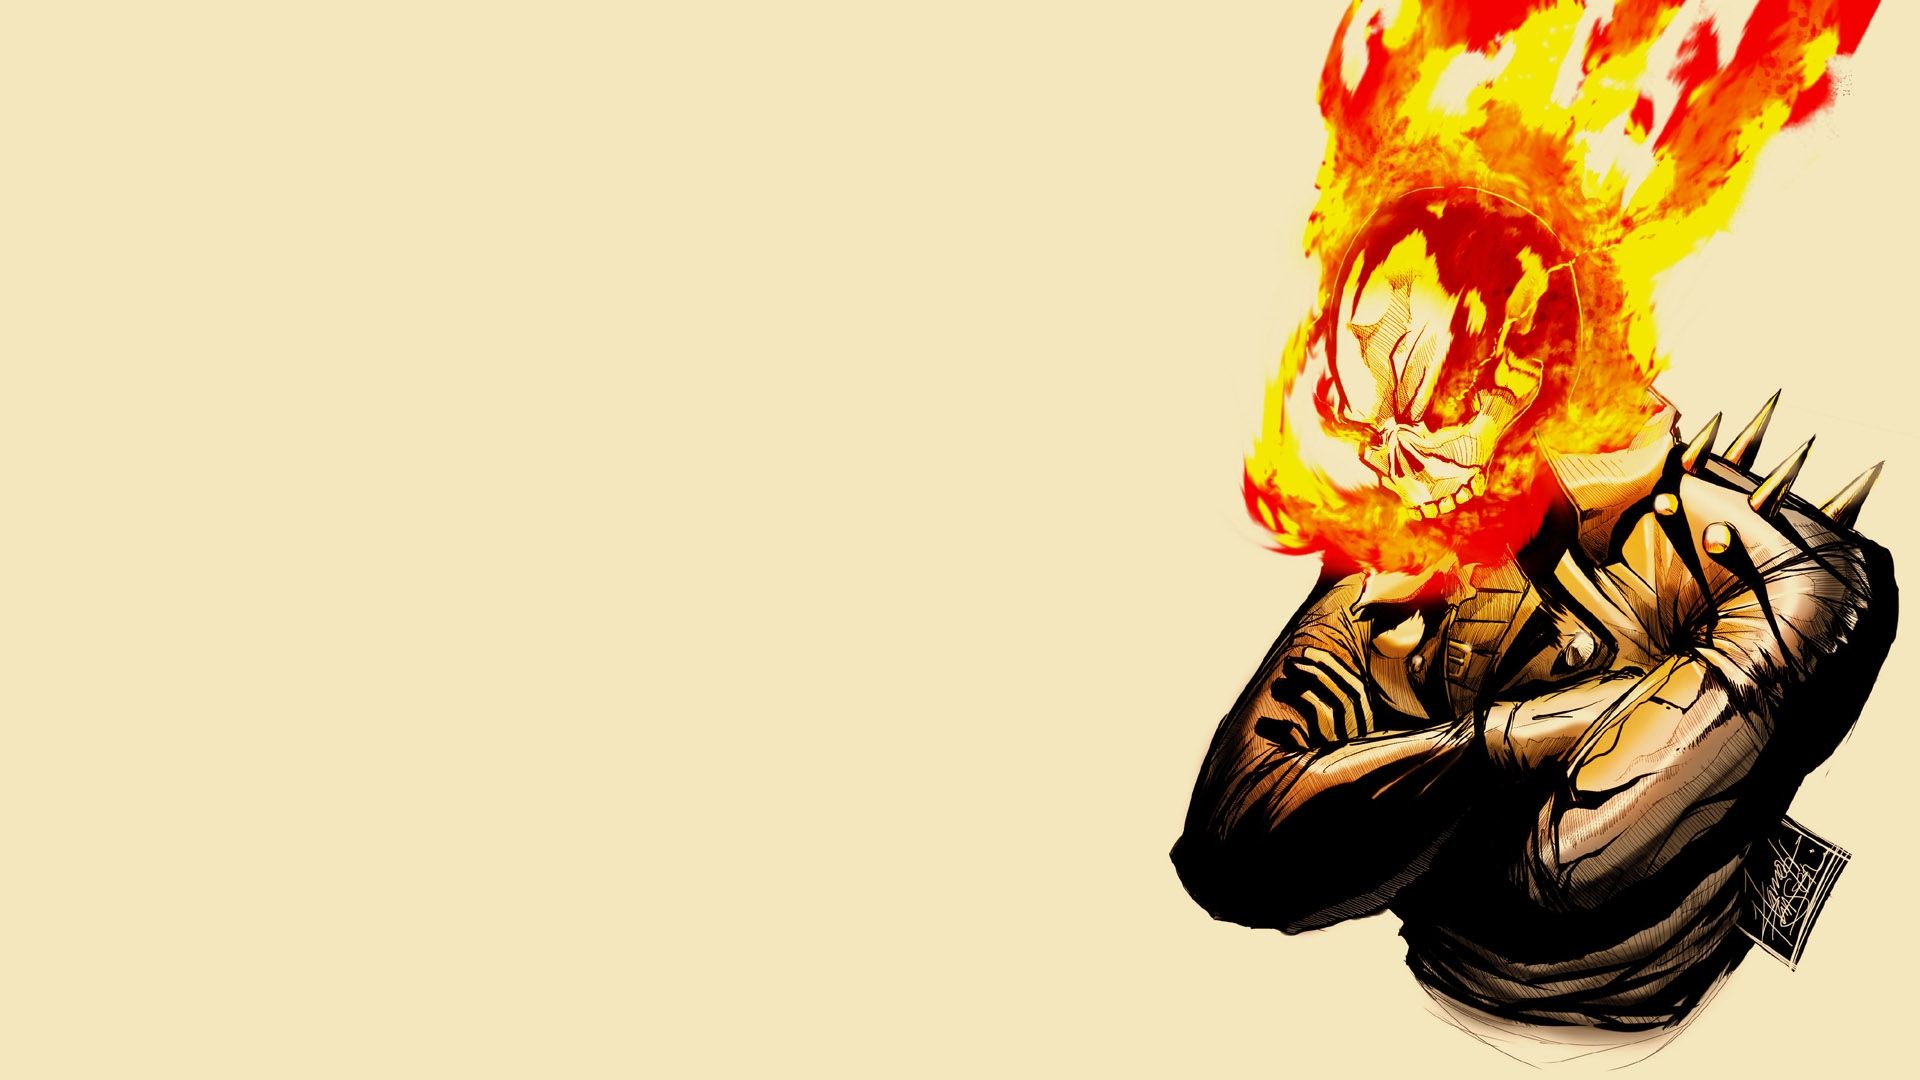 Johnny and Ghost Rider Wallpaper. Pirates Johnny Depp Wallpaper, Johnny Bravo Wallpaper and Mortal Kombat Johnny Cage Wallpaper